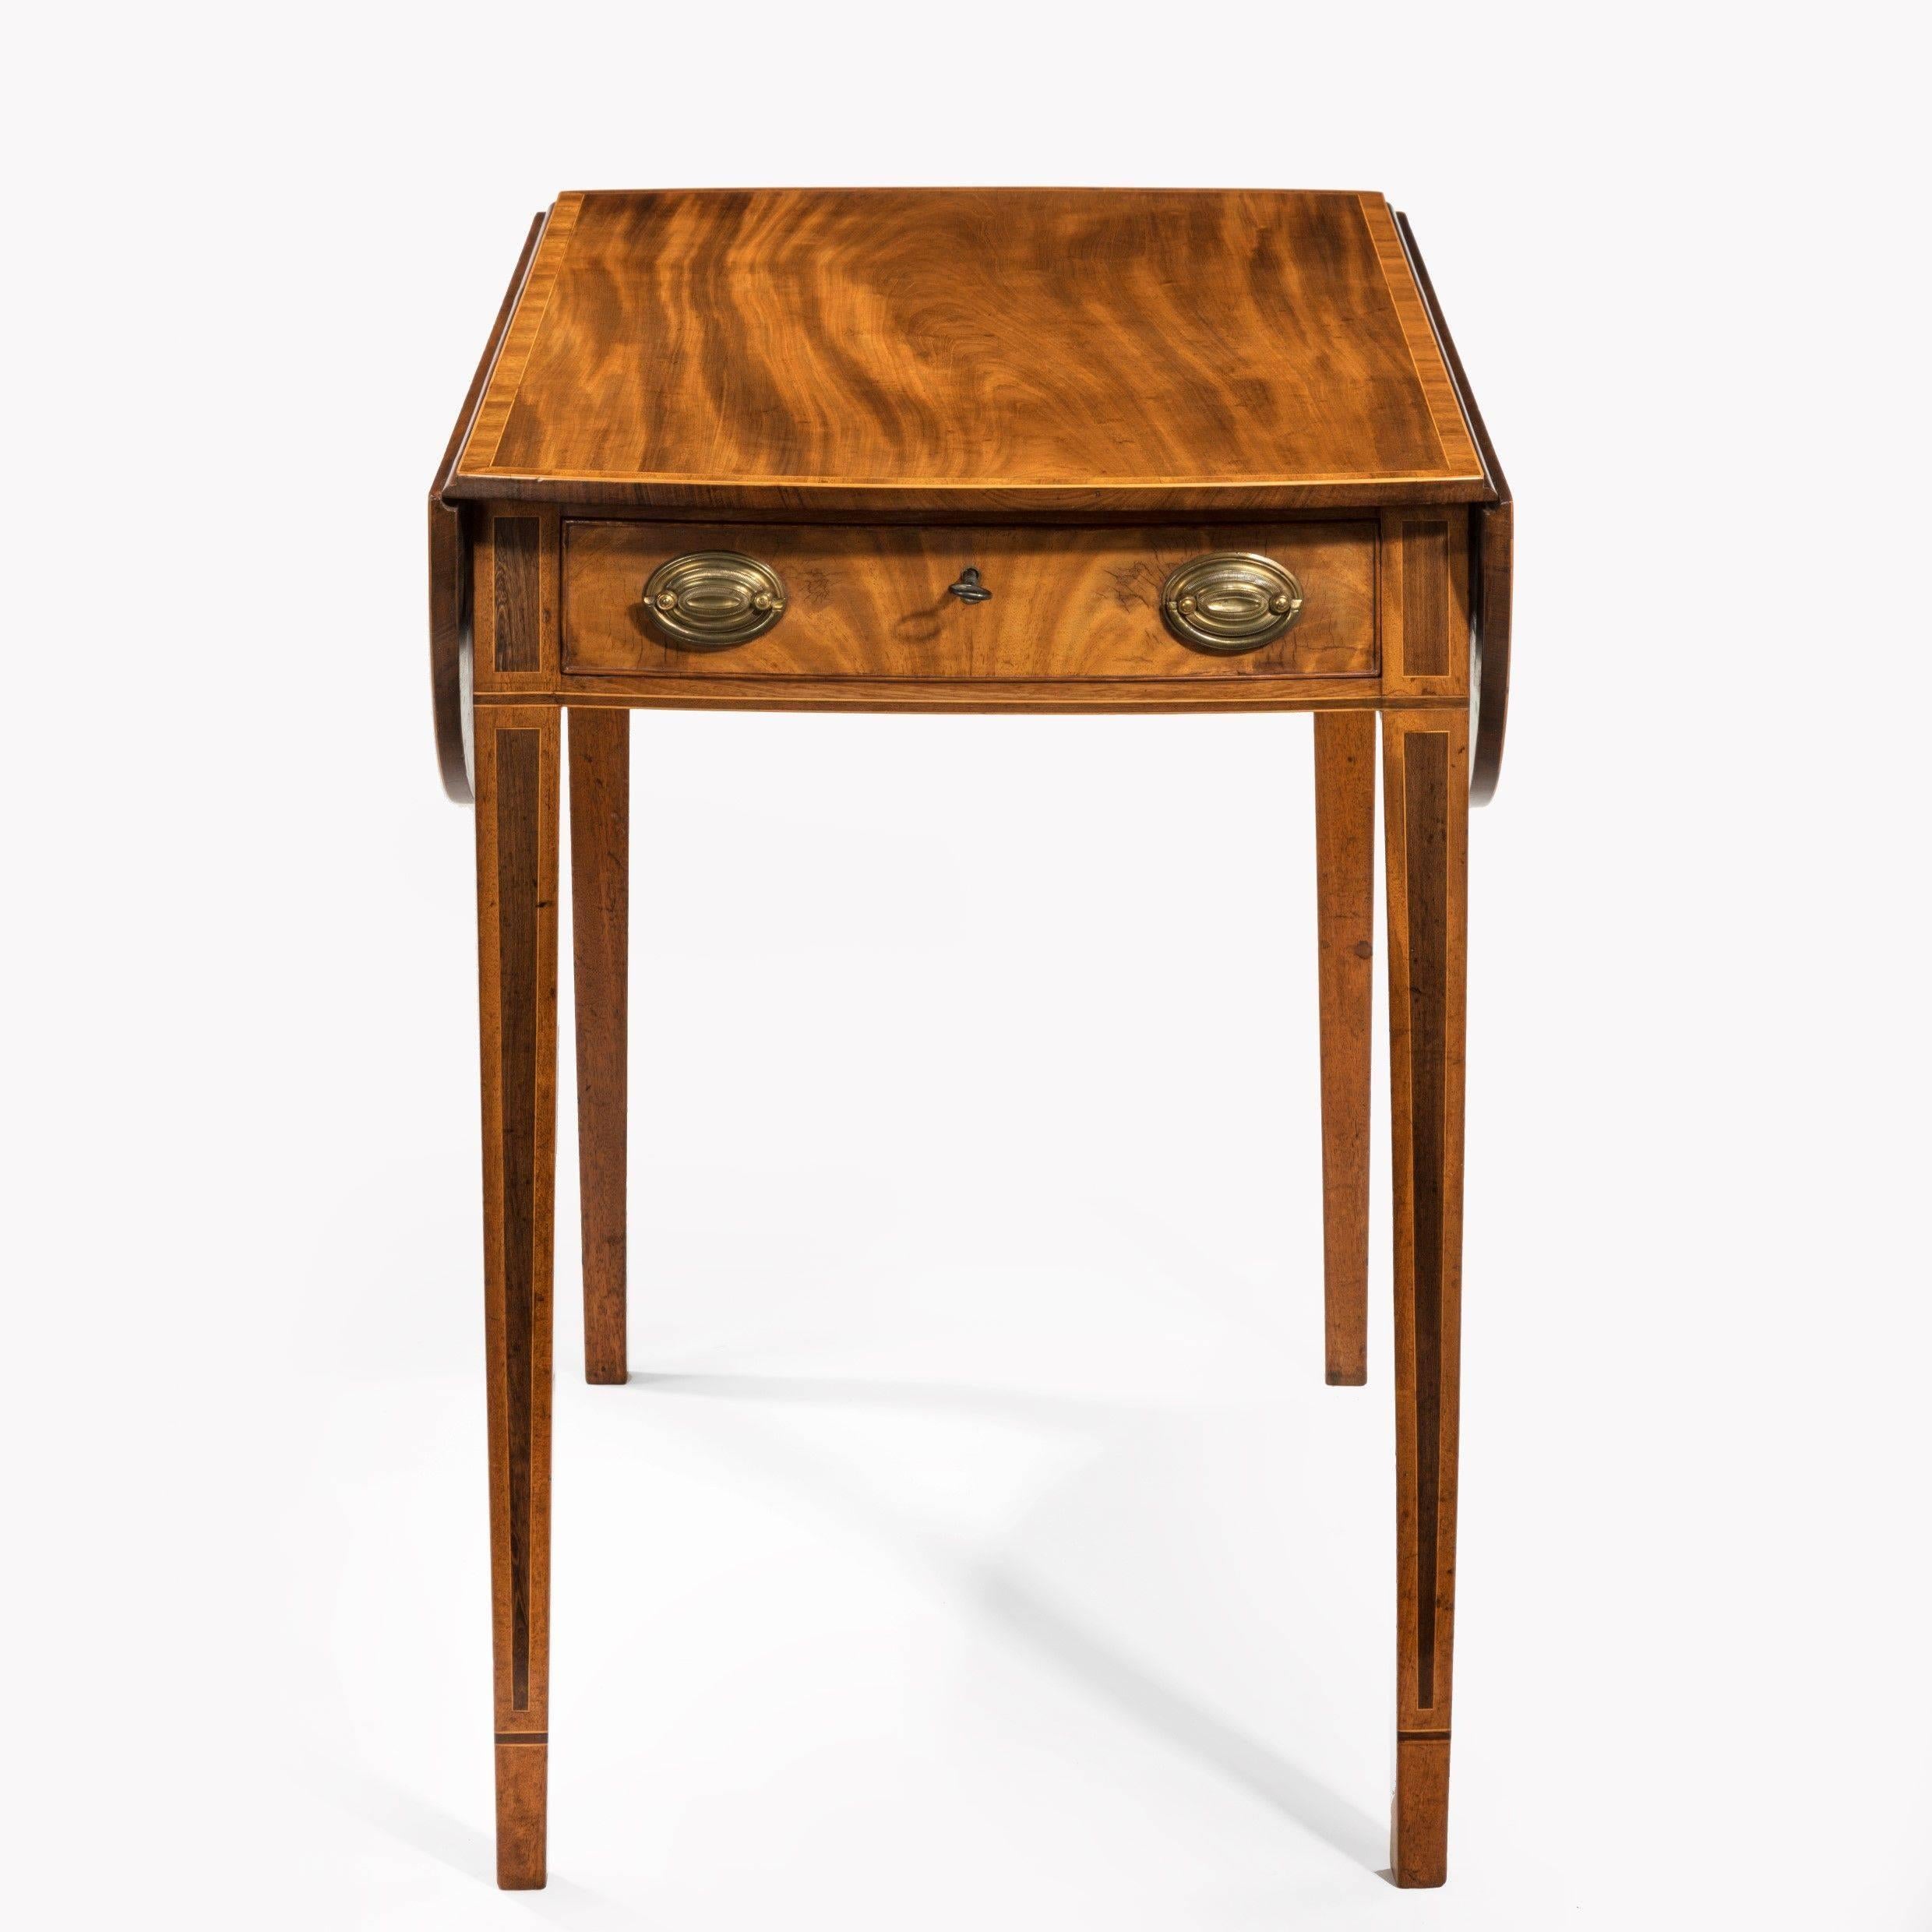 George III oval mahogany and king wood banded Pembroke table of lovely color. The centre panel is banded in kingwood as are the two flaps. 

The whole raised on square tapering legs. 

Measure: H 28 3/4 
W open. 37 1/2 
Closed 18 1/2.